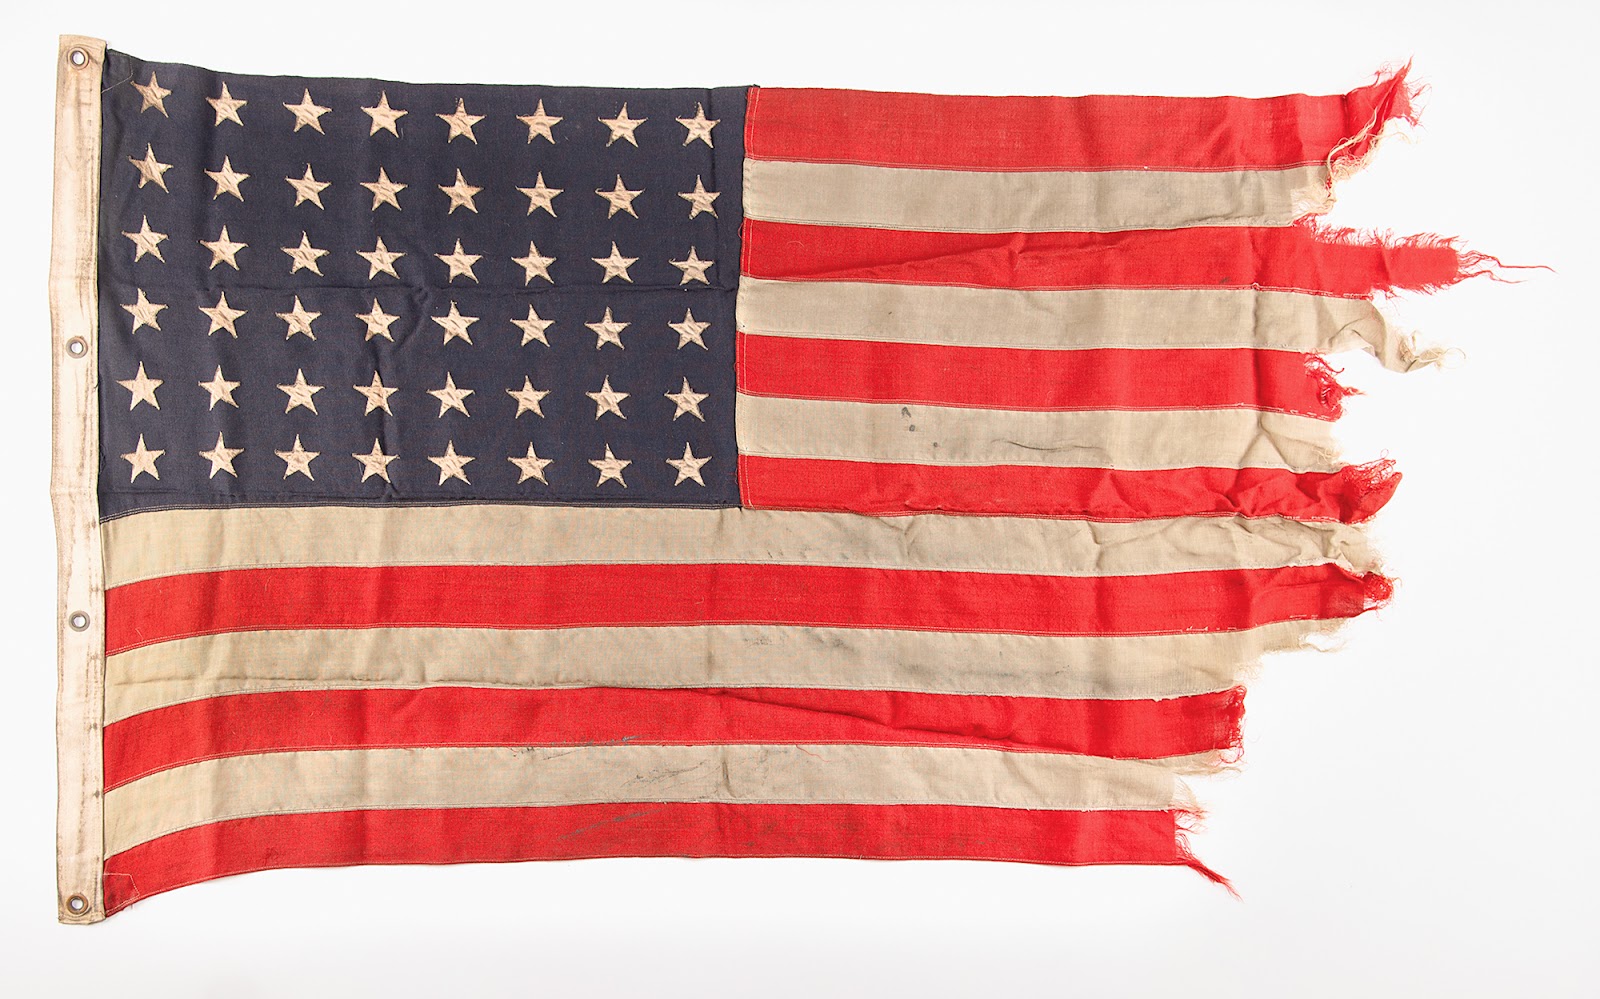 Normandy Invasion flag from the USS Burnett County (LST-512).